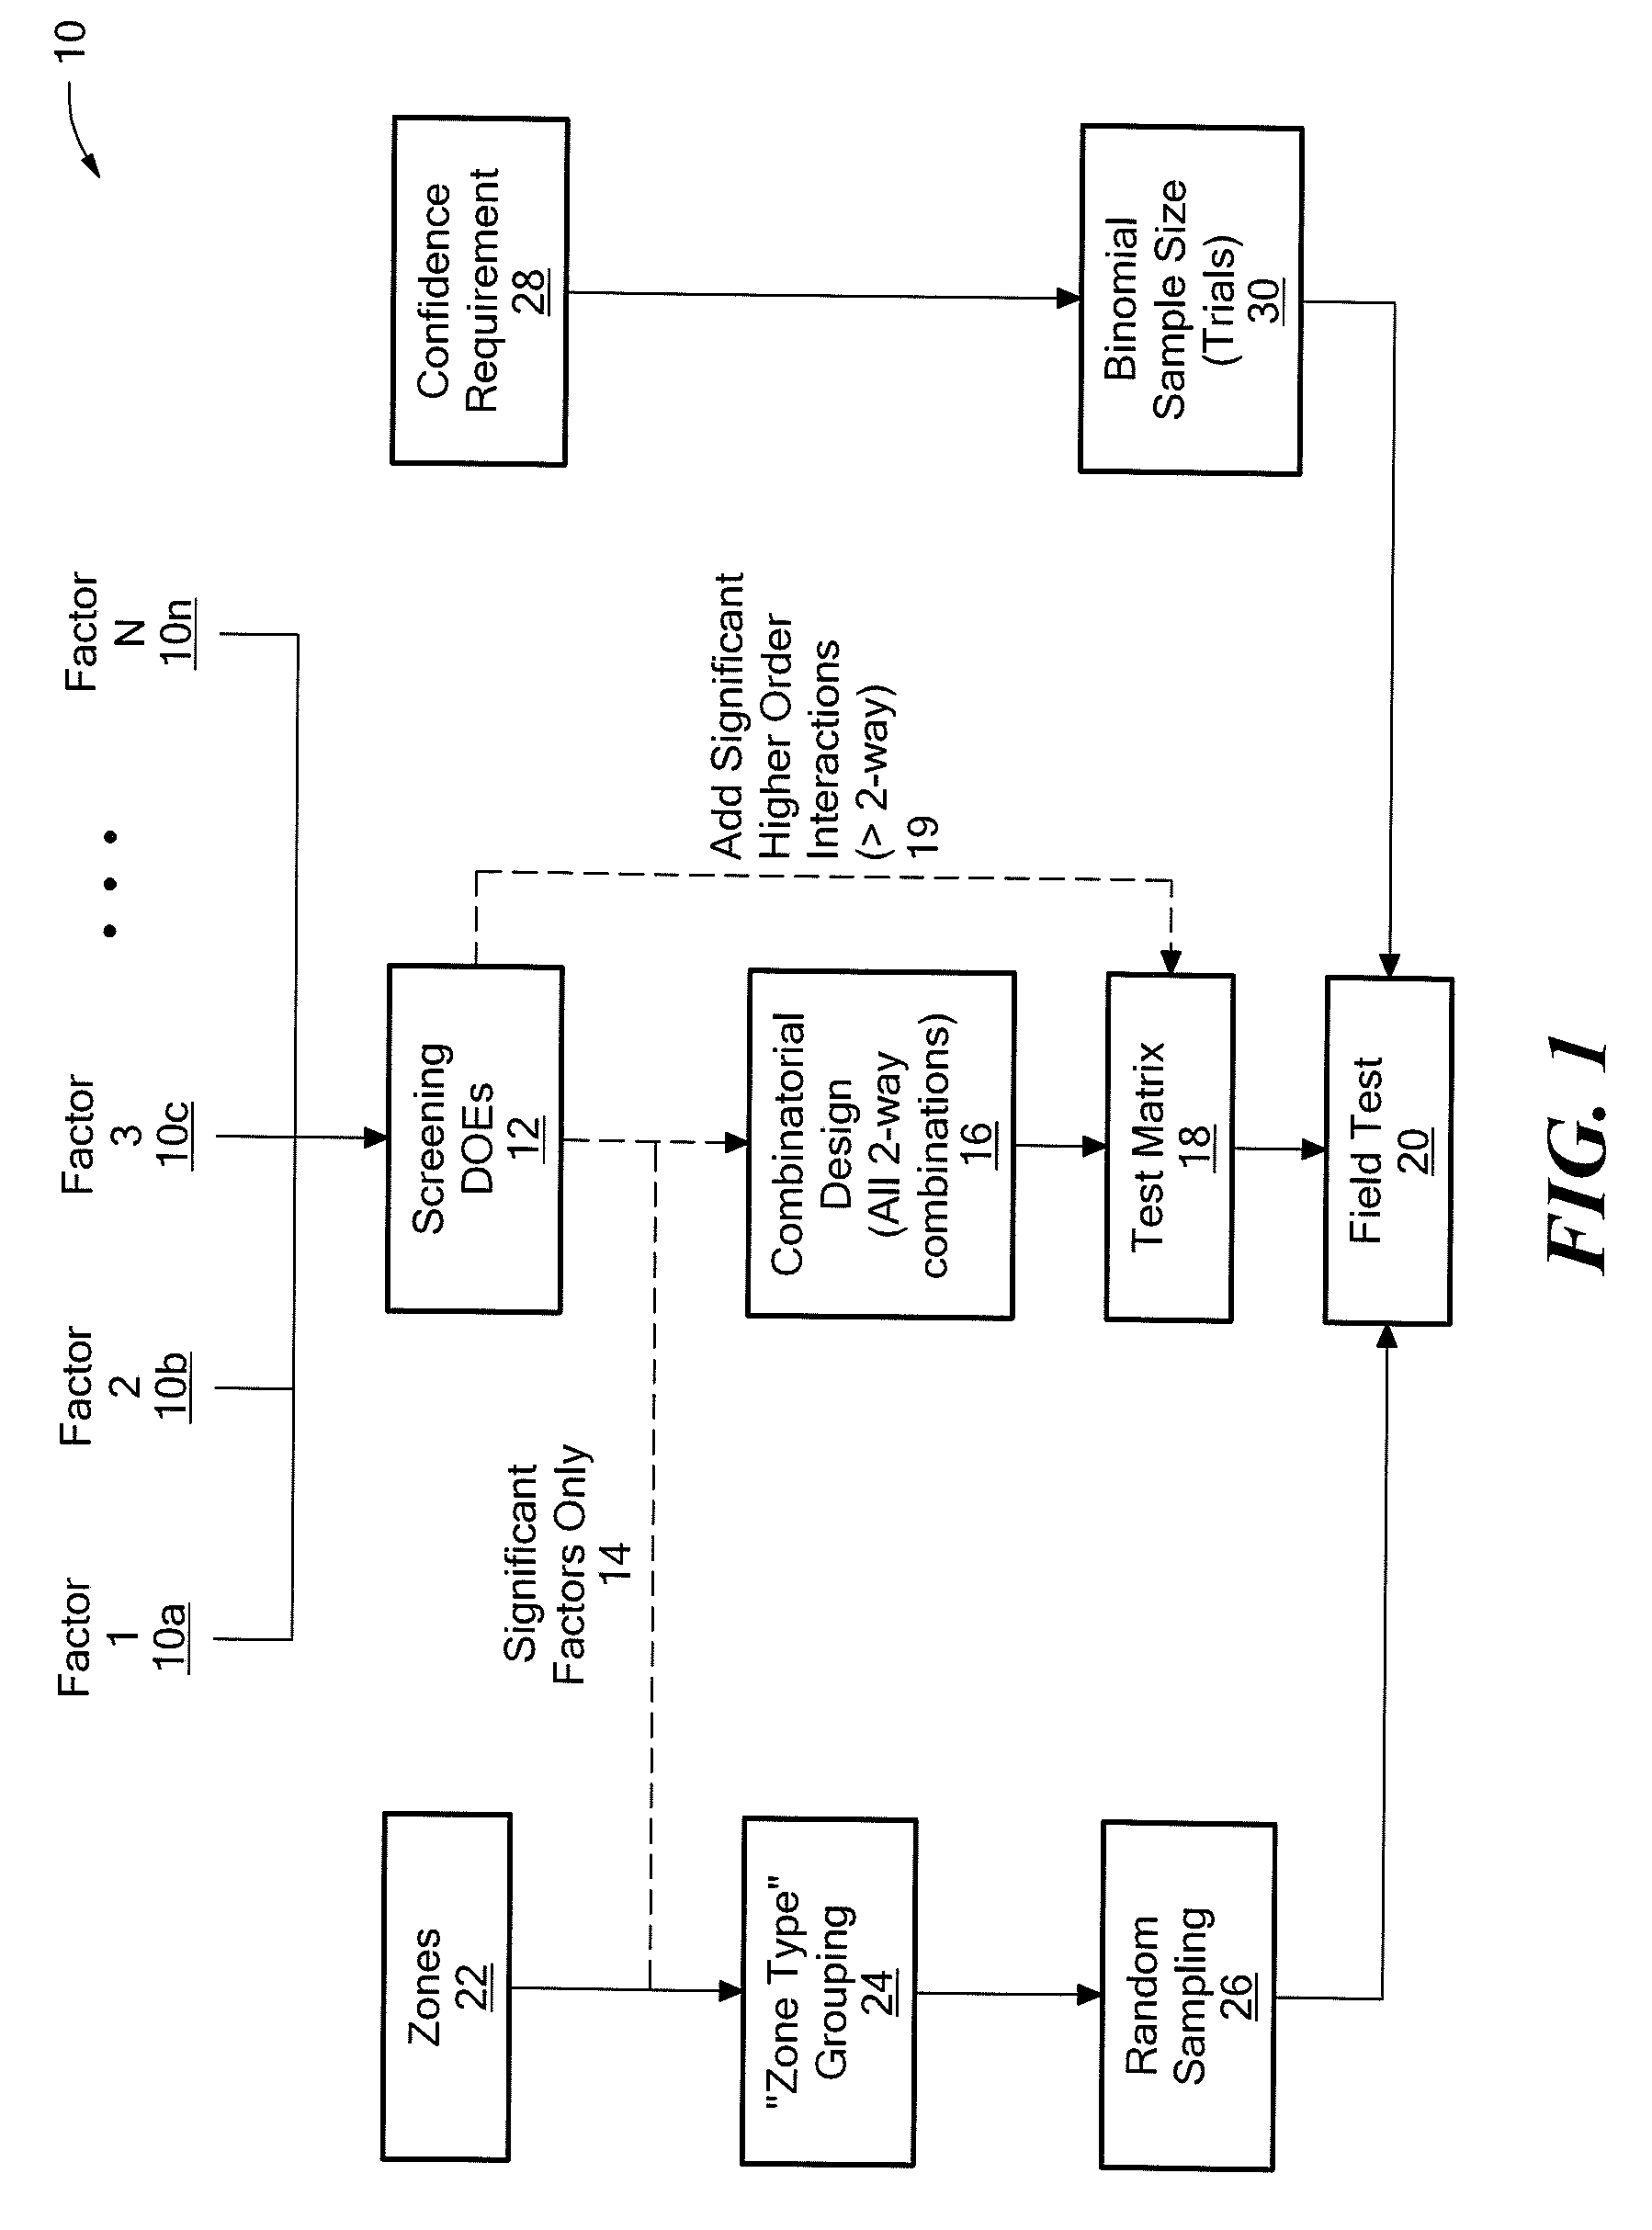 Method and Apparatus for Generating a Test Plan Using a Statistical Test Approach